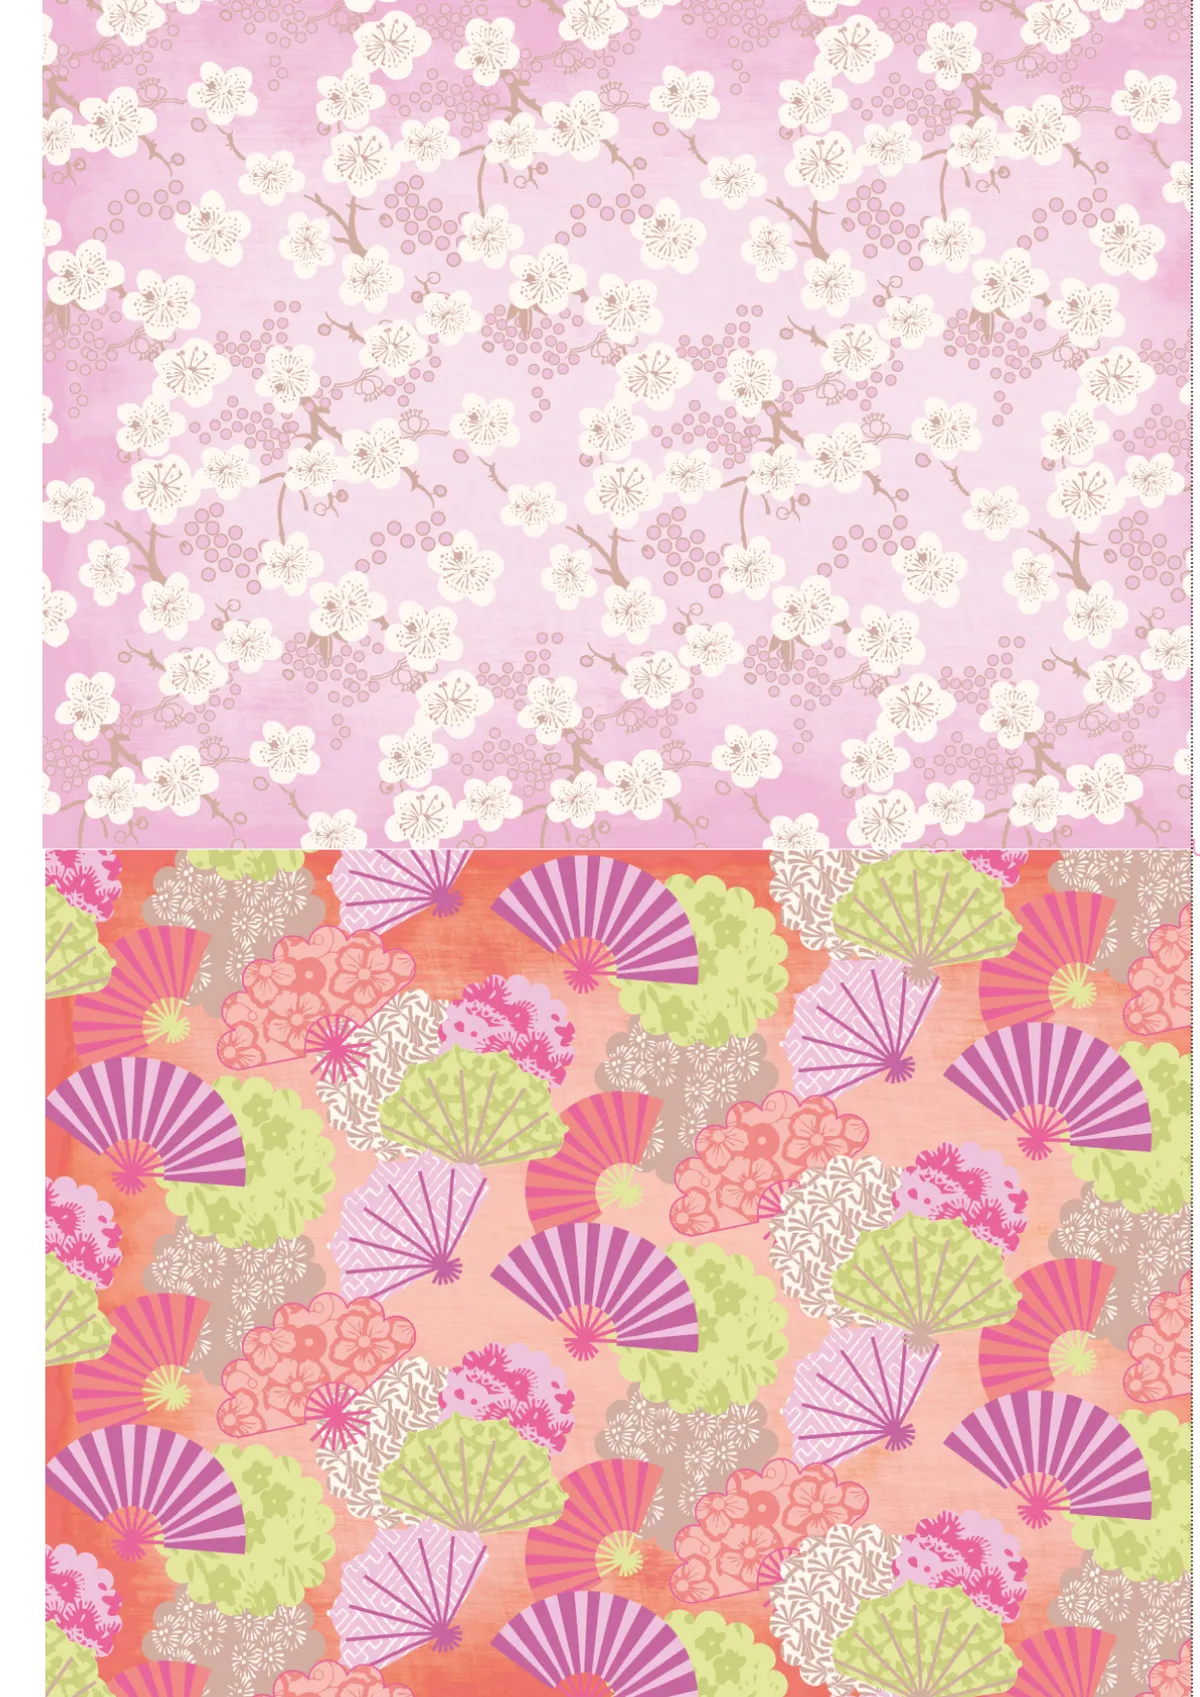 Japanese Dreams patterned papers 07